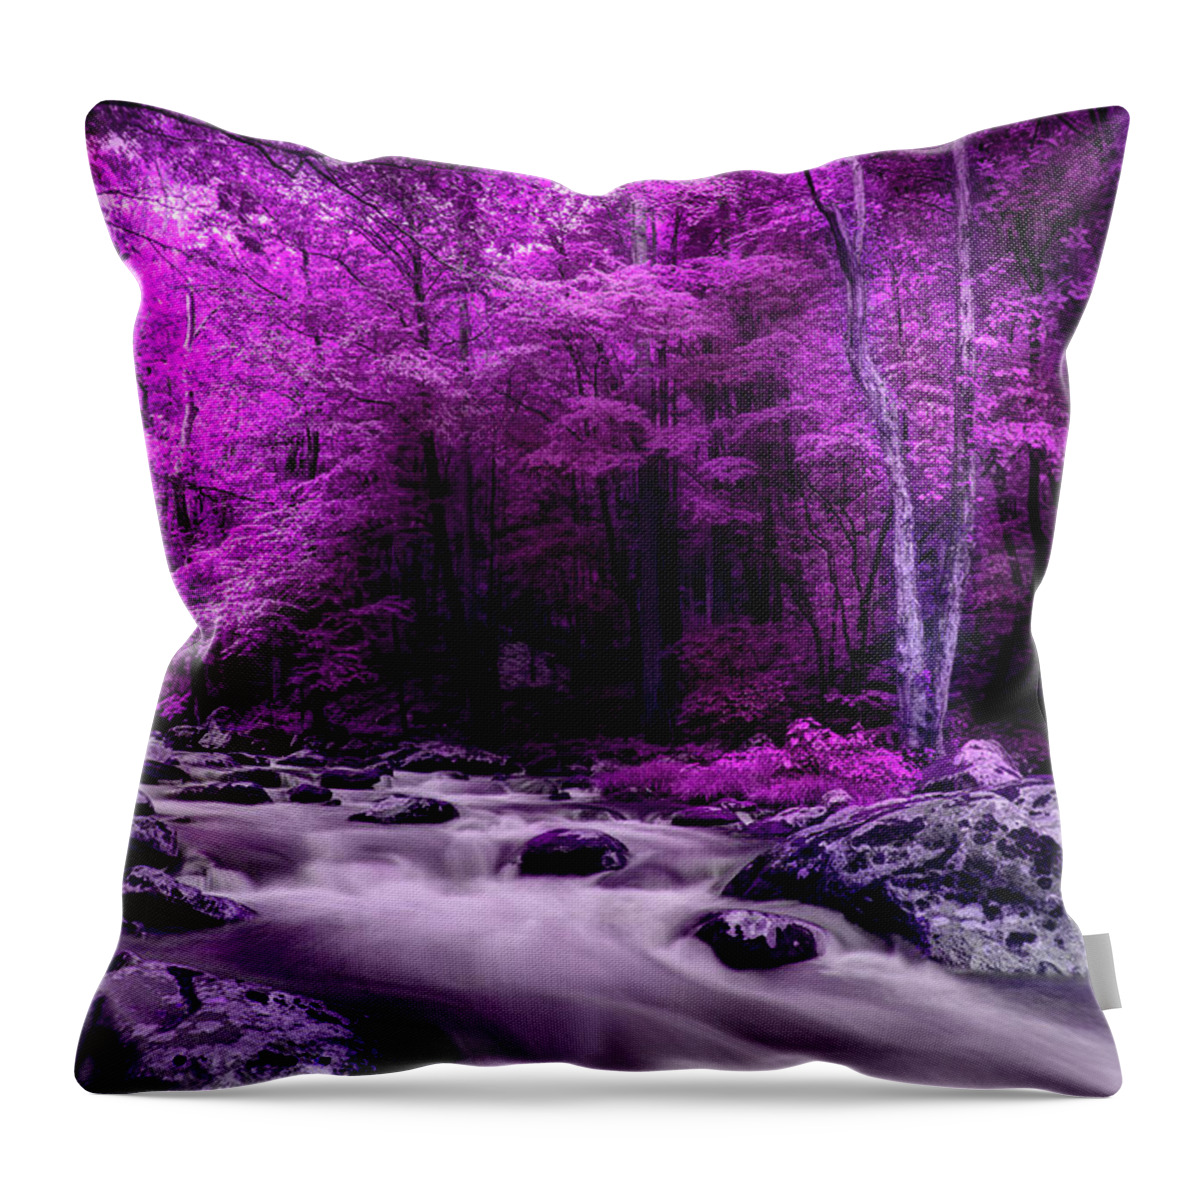 River Throw Pillow featuring the photograph Can You Keep A Secret by Mike Eingle